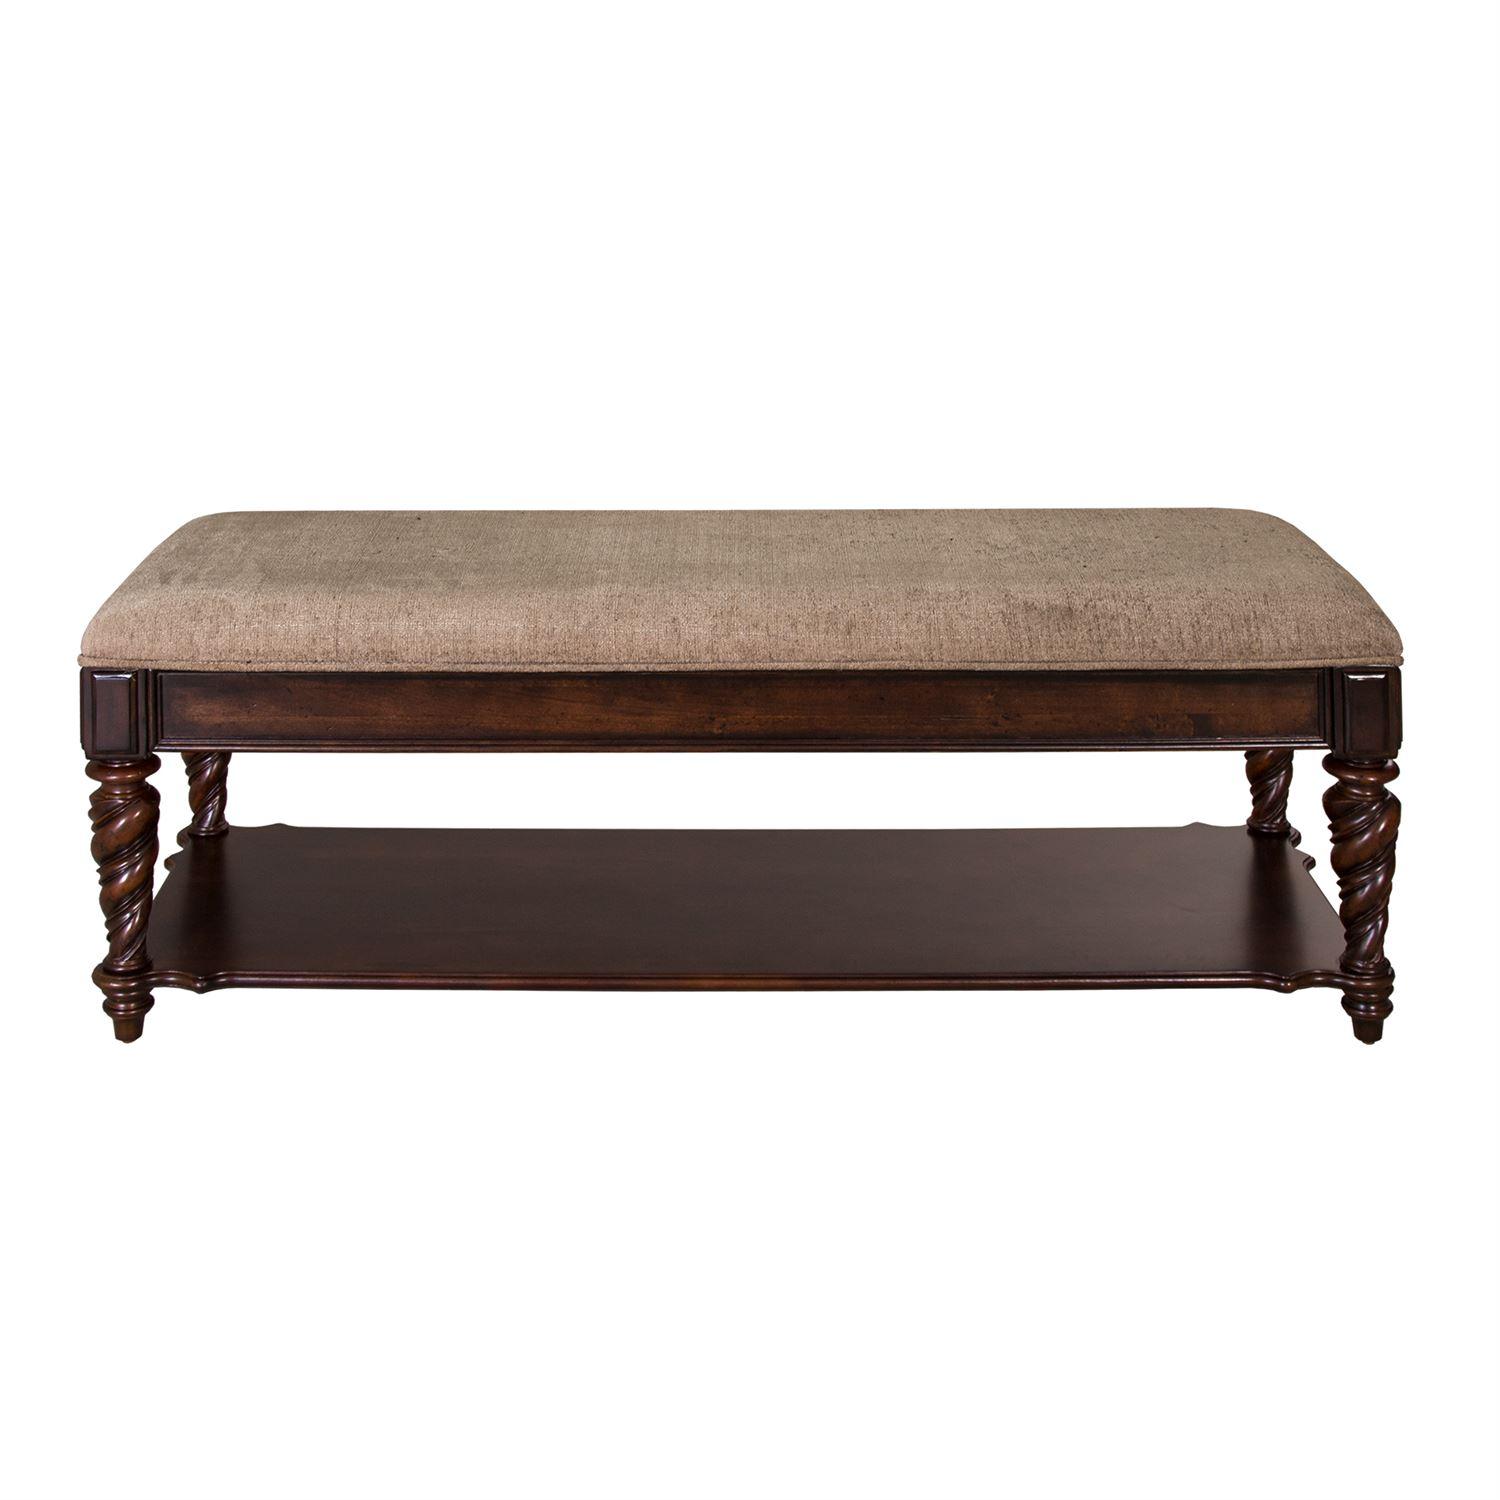 European Traditional Bench Arbor Place  (575-BR) Bench 575-BR47 in Brown 